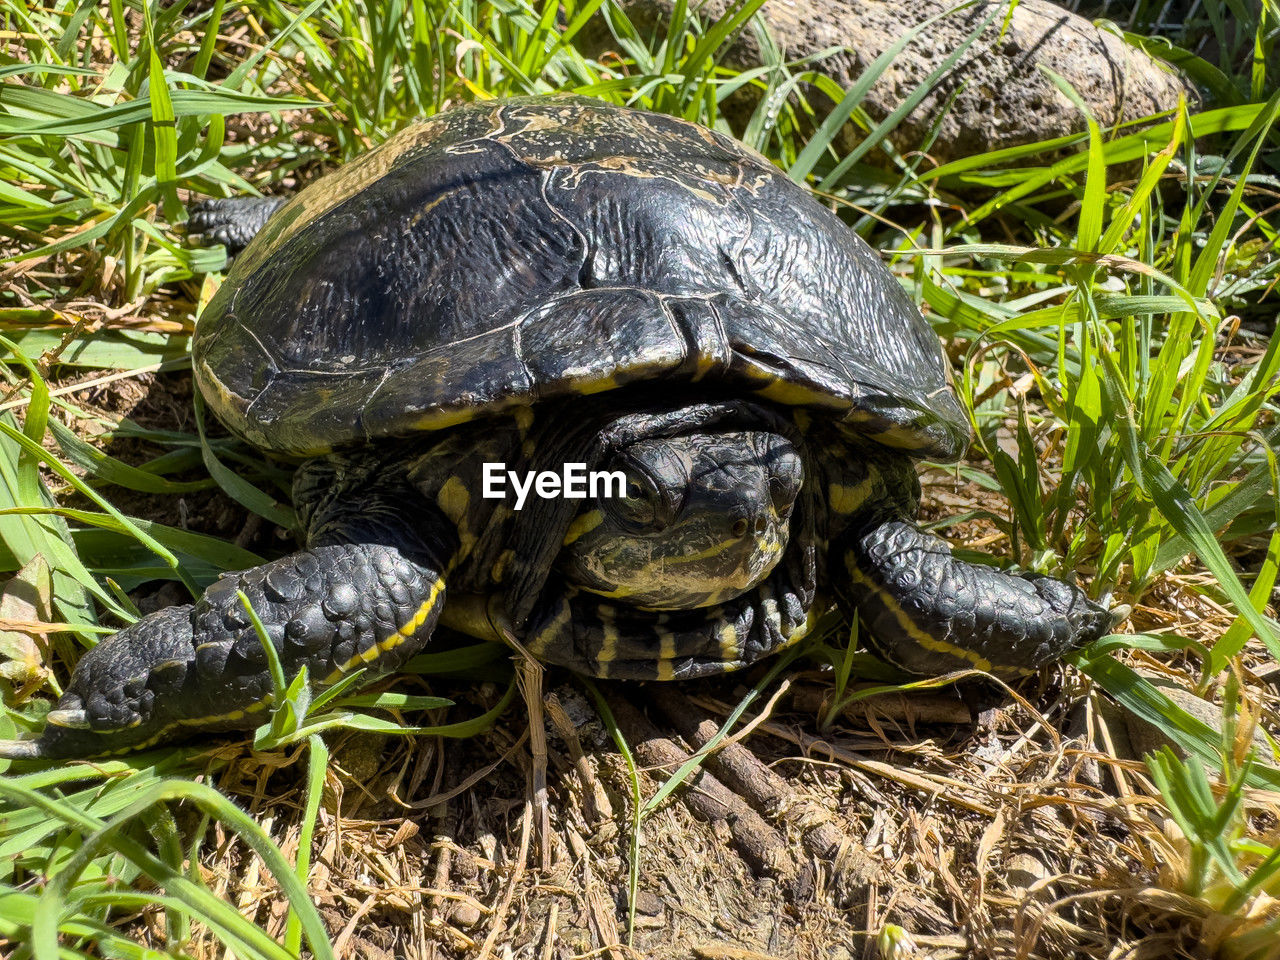 turtle, animal themes, animal, reptile, animal wildlife, tortoise, shell, wildlife, animal shell, one animal, nature, grass, plant, tortoise shell, no people, land, day, close-up, boredom, outdoors, field, high angle view